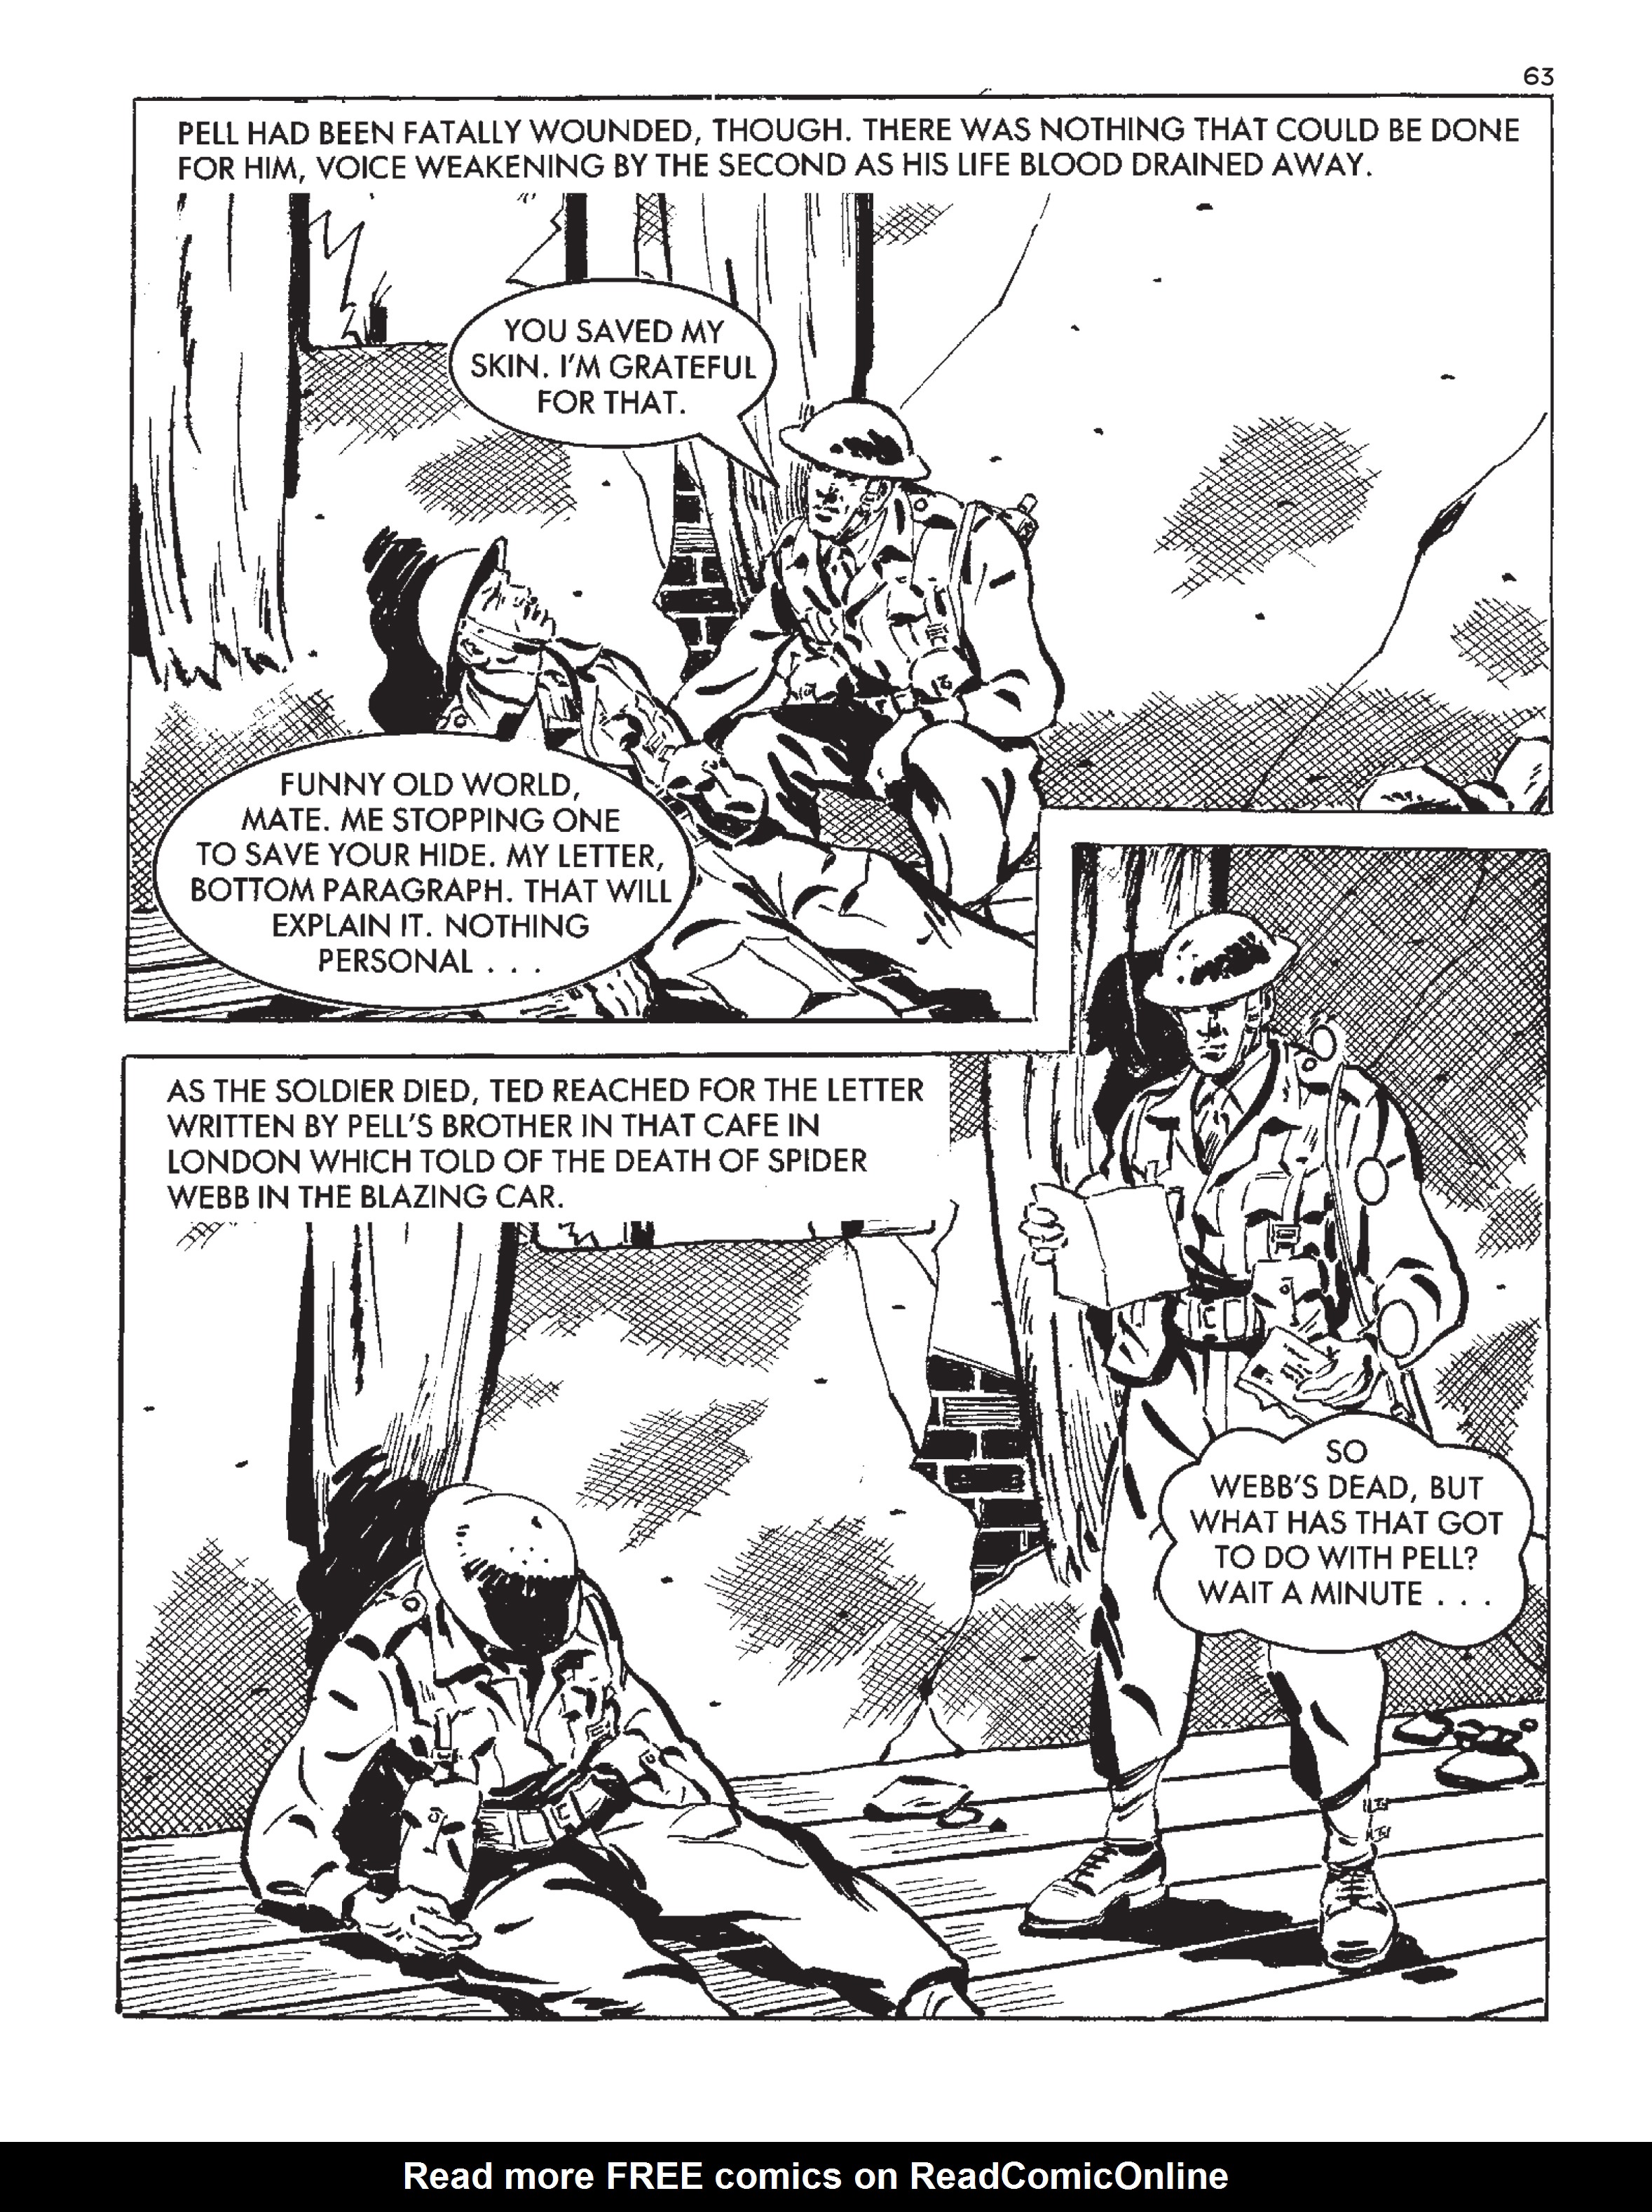 Read online Commando: For Action and Adventure comic -  Issue #5210 - 62